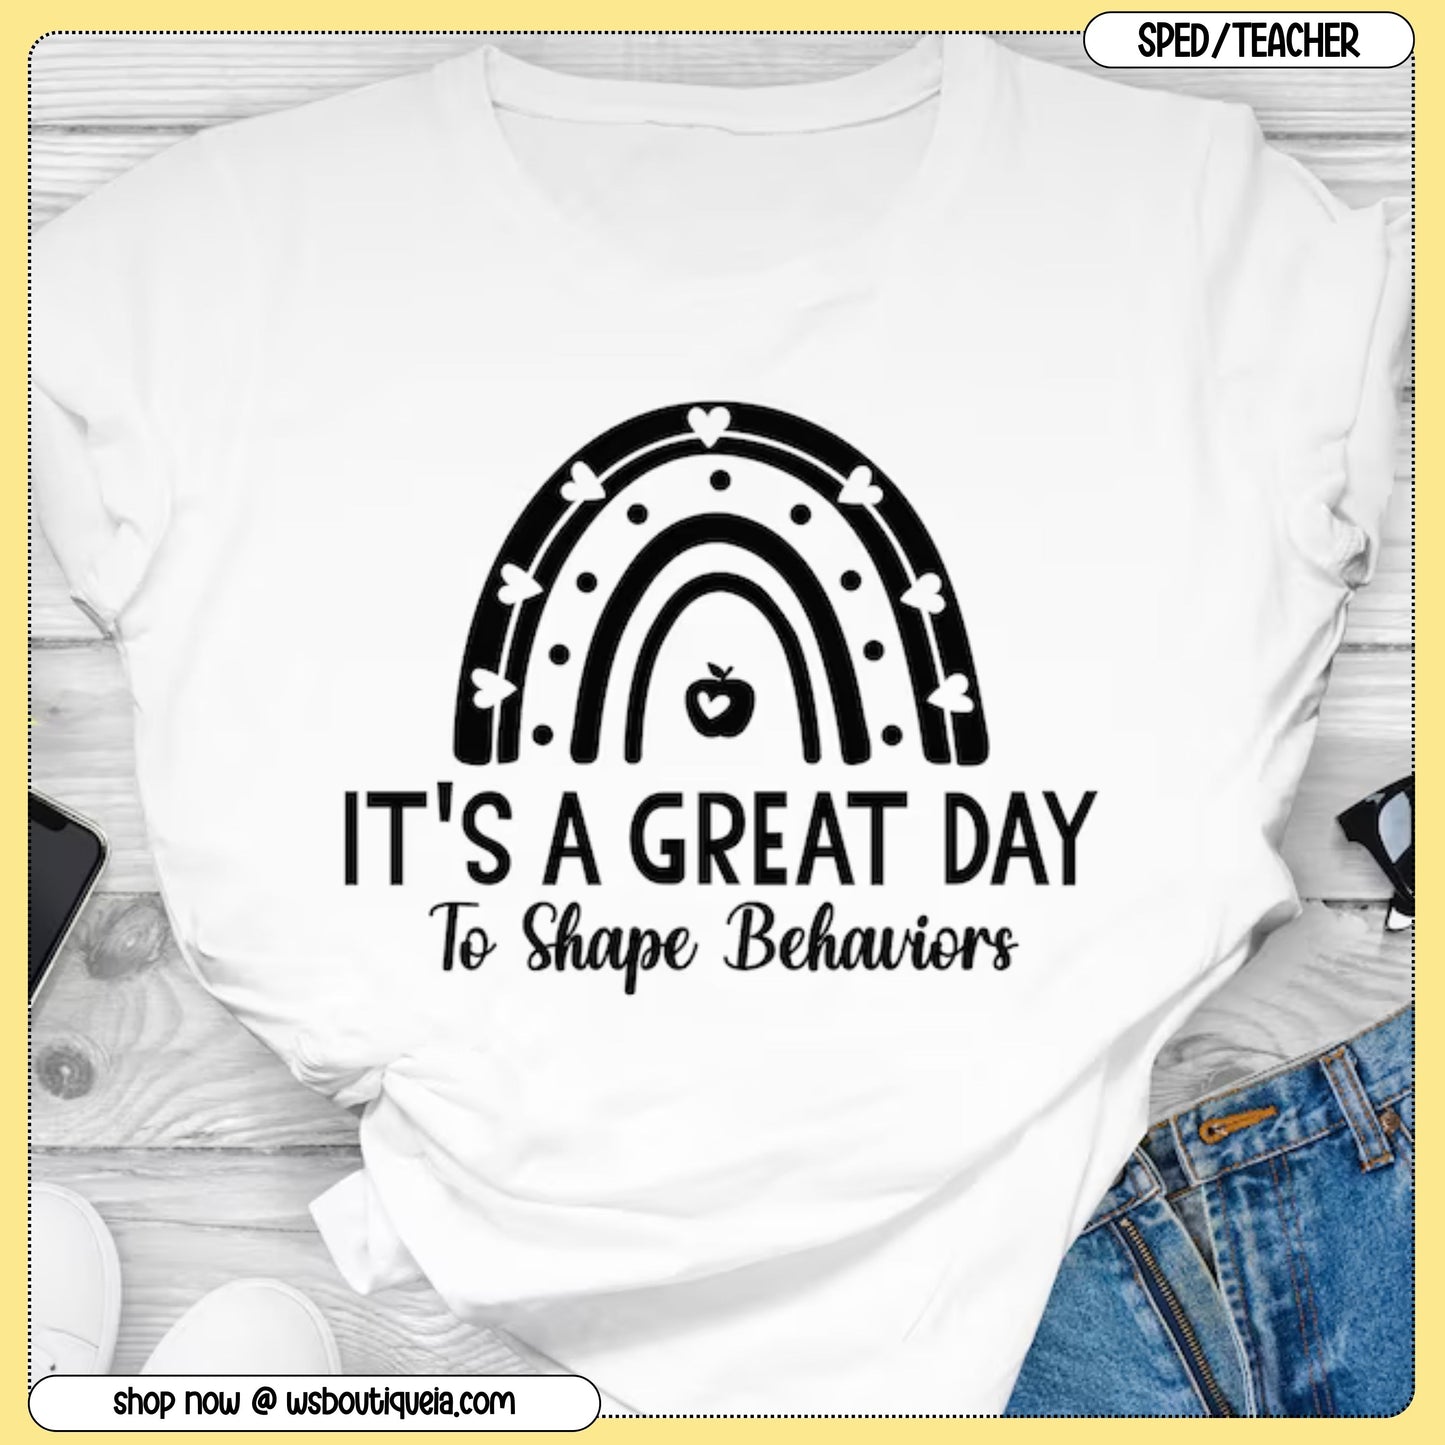 It's A Great Day To Shape Behaviors Special Education Tee/Sweatshirt